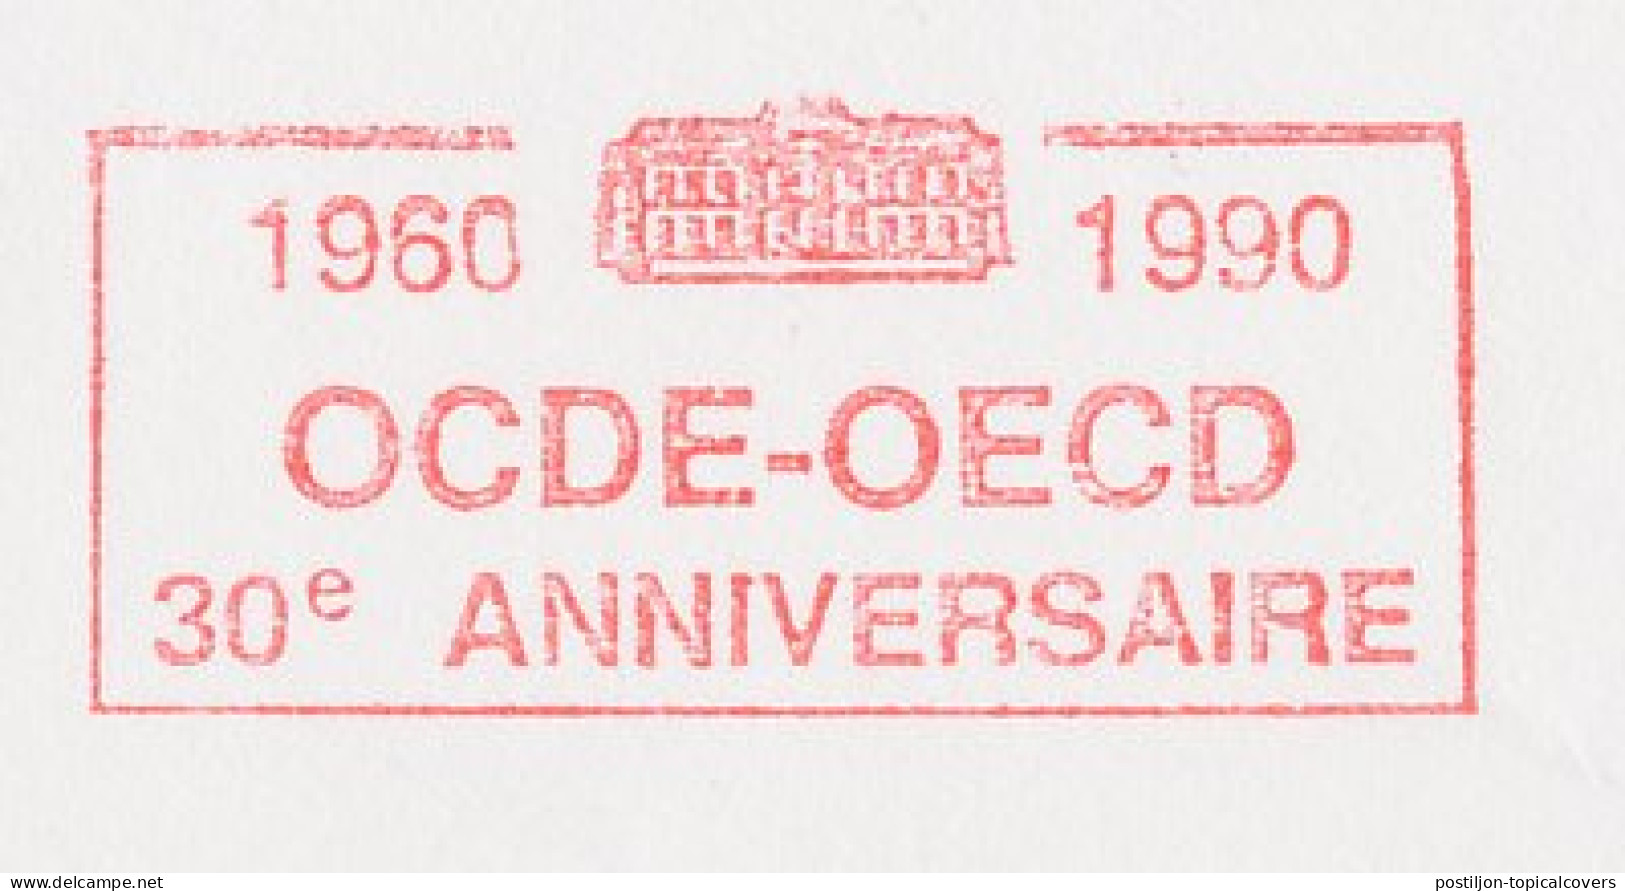 Meter Cover France 1992 OECD - Organisation For Economic Co-Operation And Developement  - Ohne Zuordnung